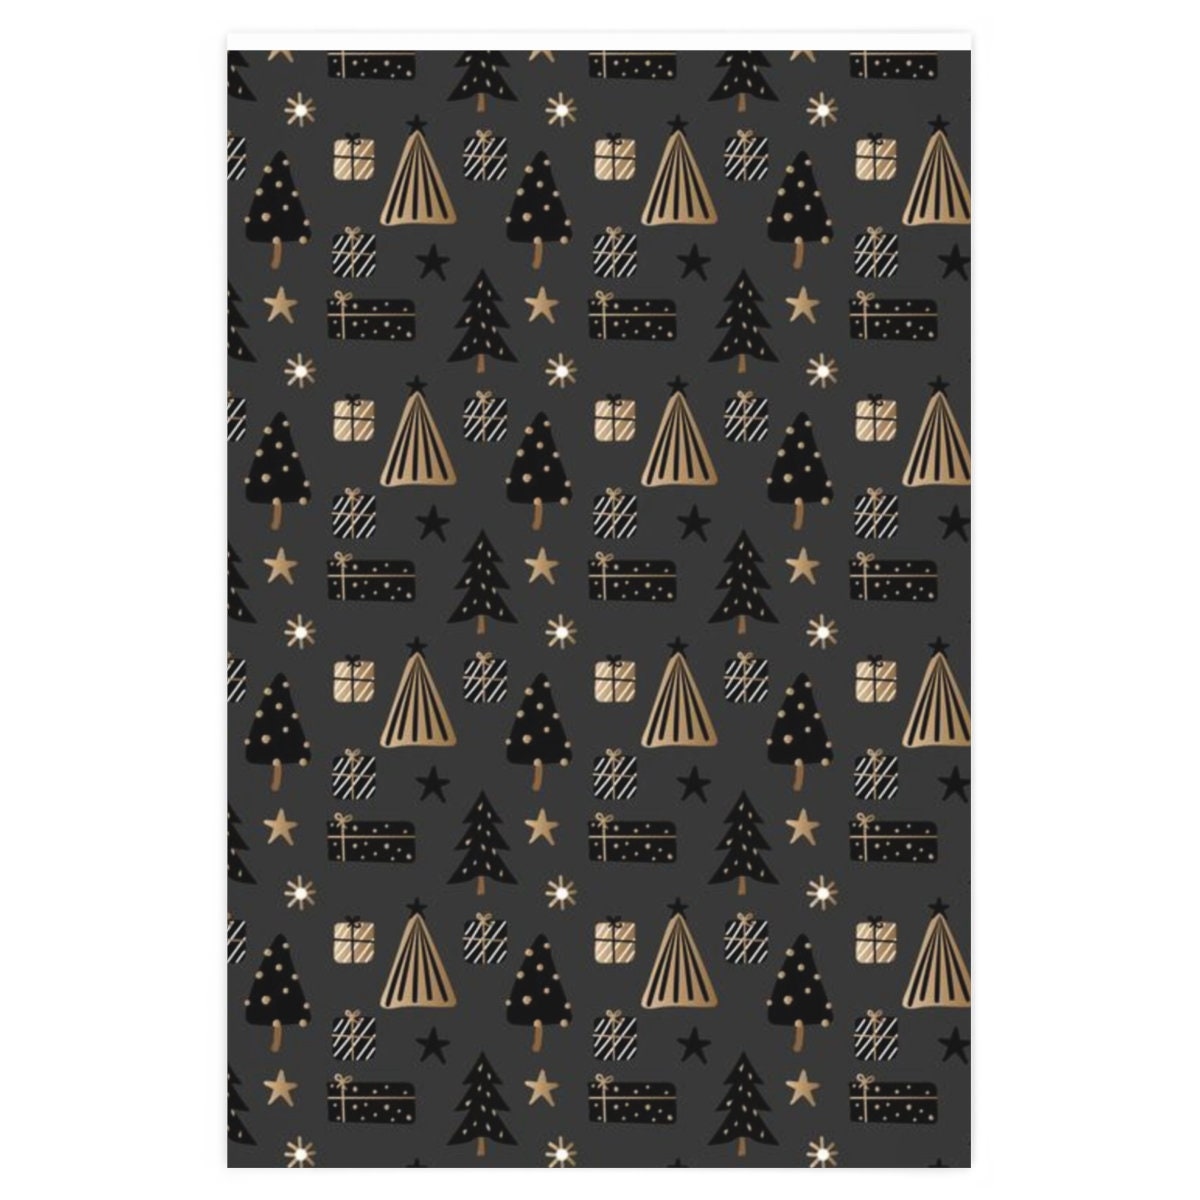 Artsy Dark Christmas Print Wrapping Paper Roll of Holiday Wrapping